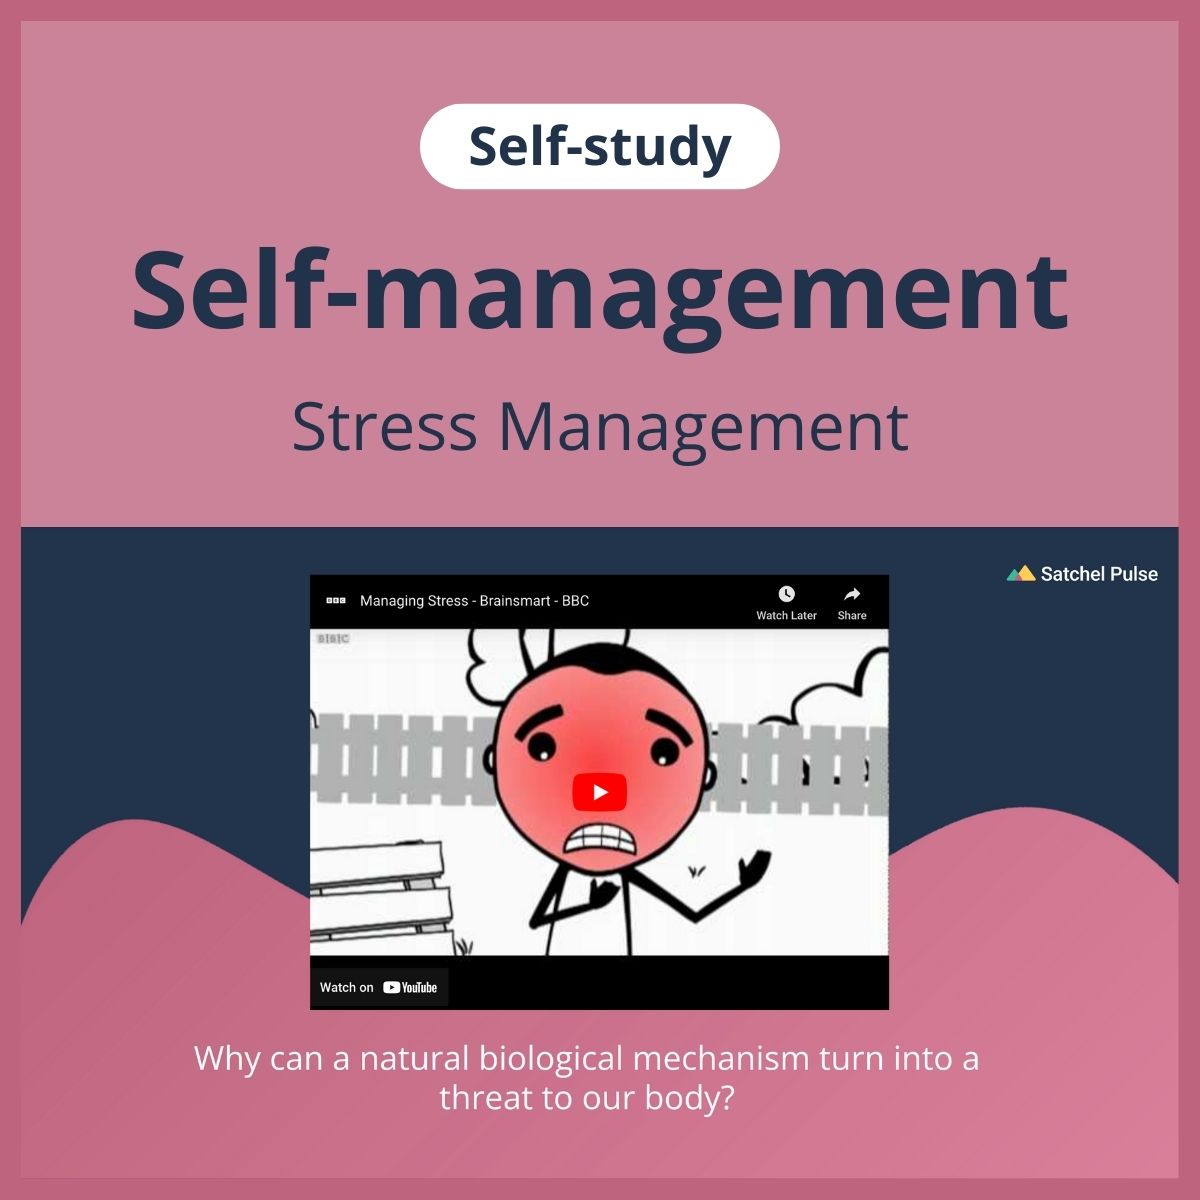 SEL self-study focusing on Stress Management to use in your classroom as one of your SEL activities for Self-Management